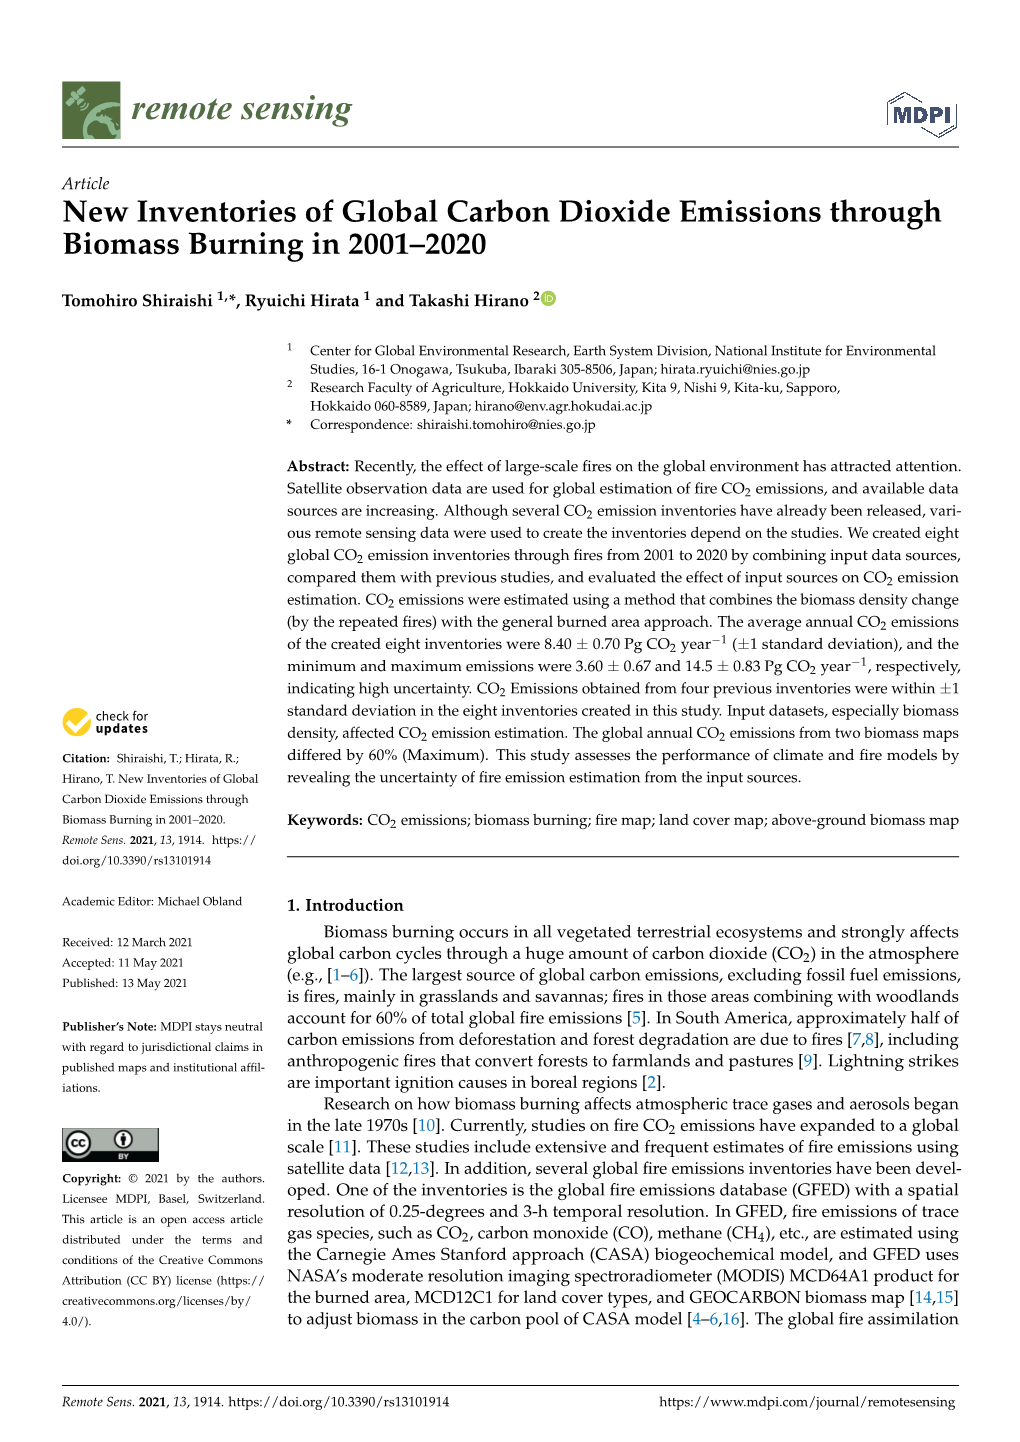 New Inventories of Global Carbon Dioxide Emissions Through Biomass Burning in 2001–2020